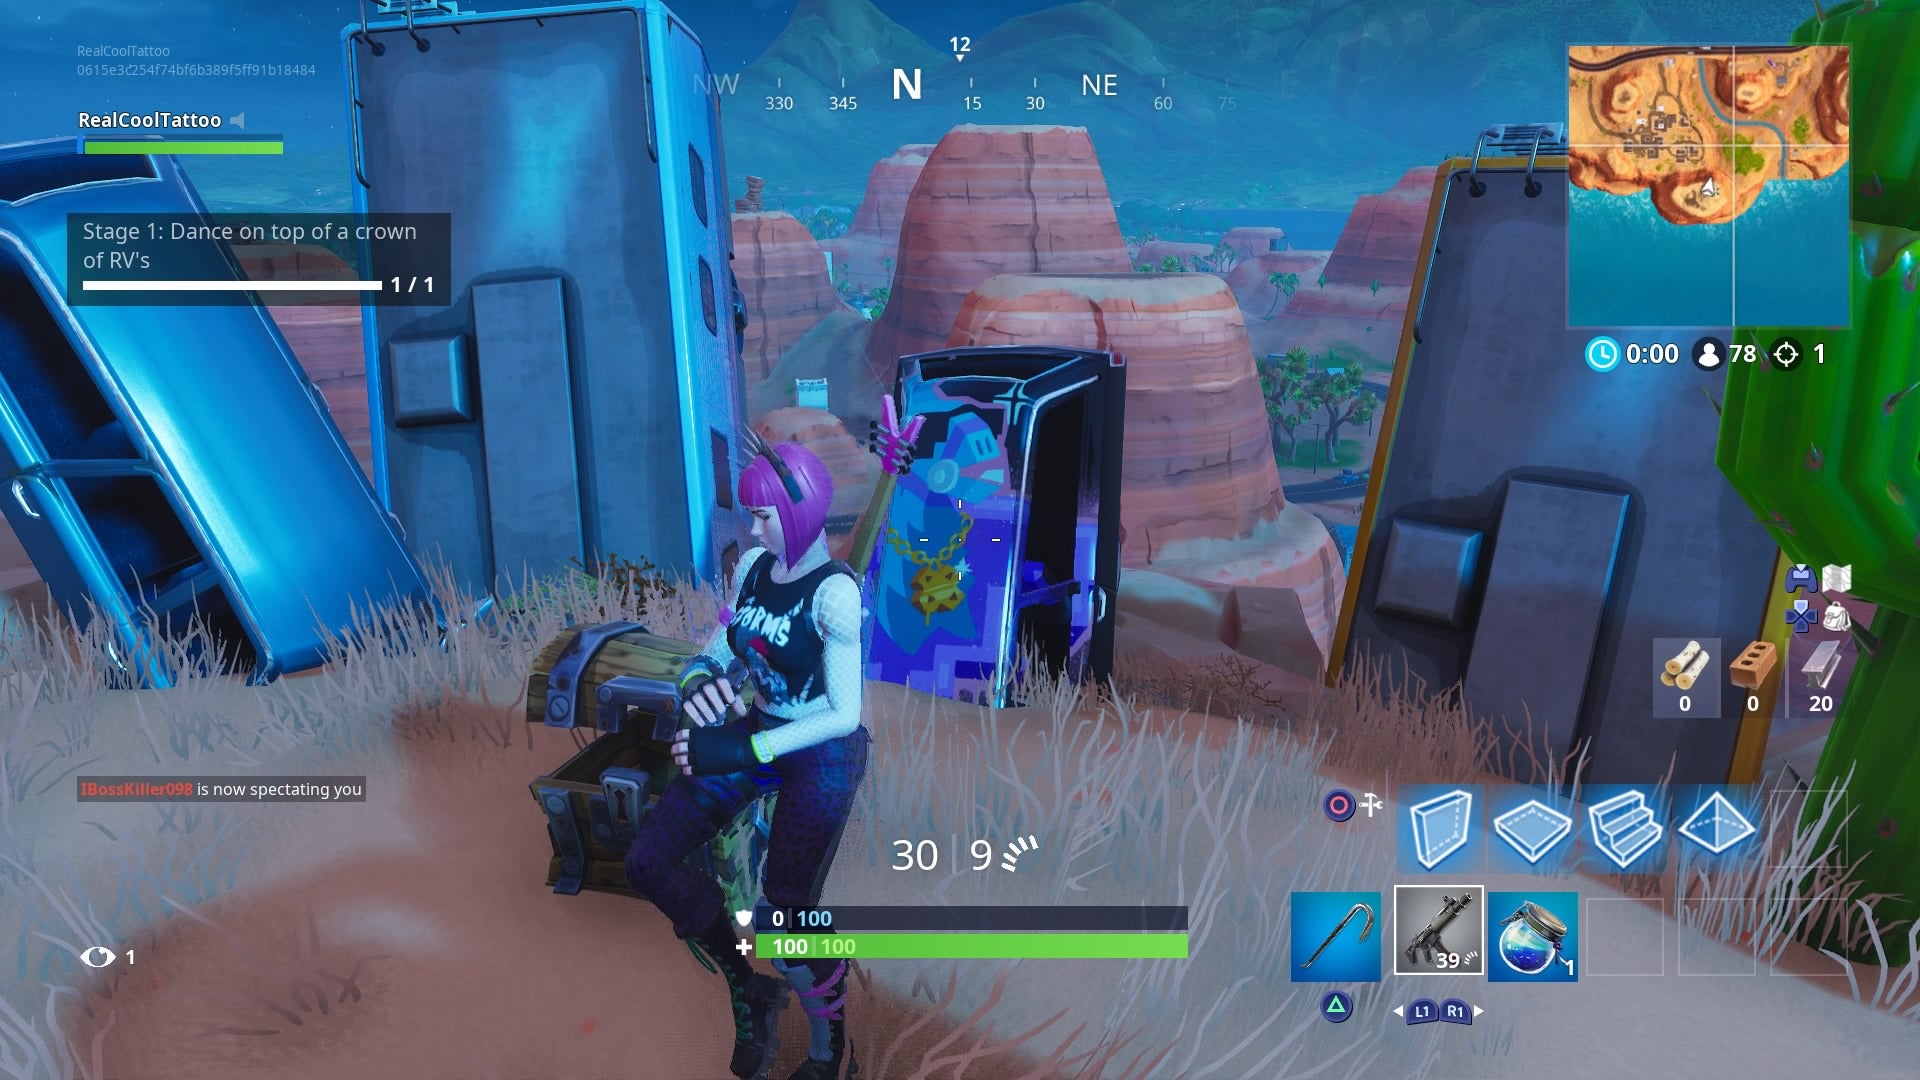 Fortnite: Dance on a crown of RVs, Metal Turtle, and a Submarine | VG247